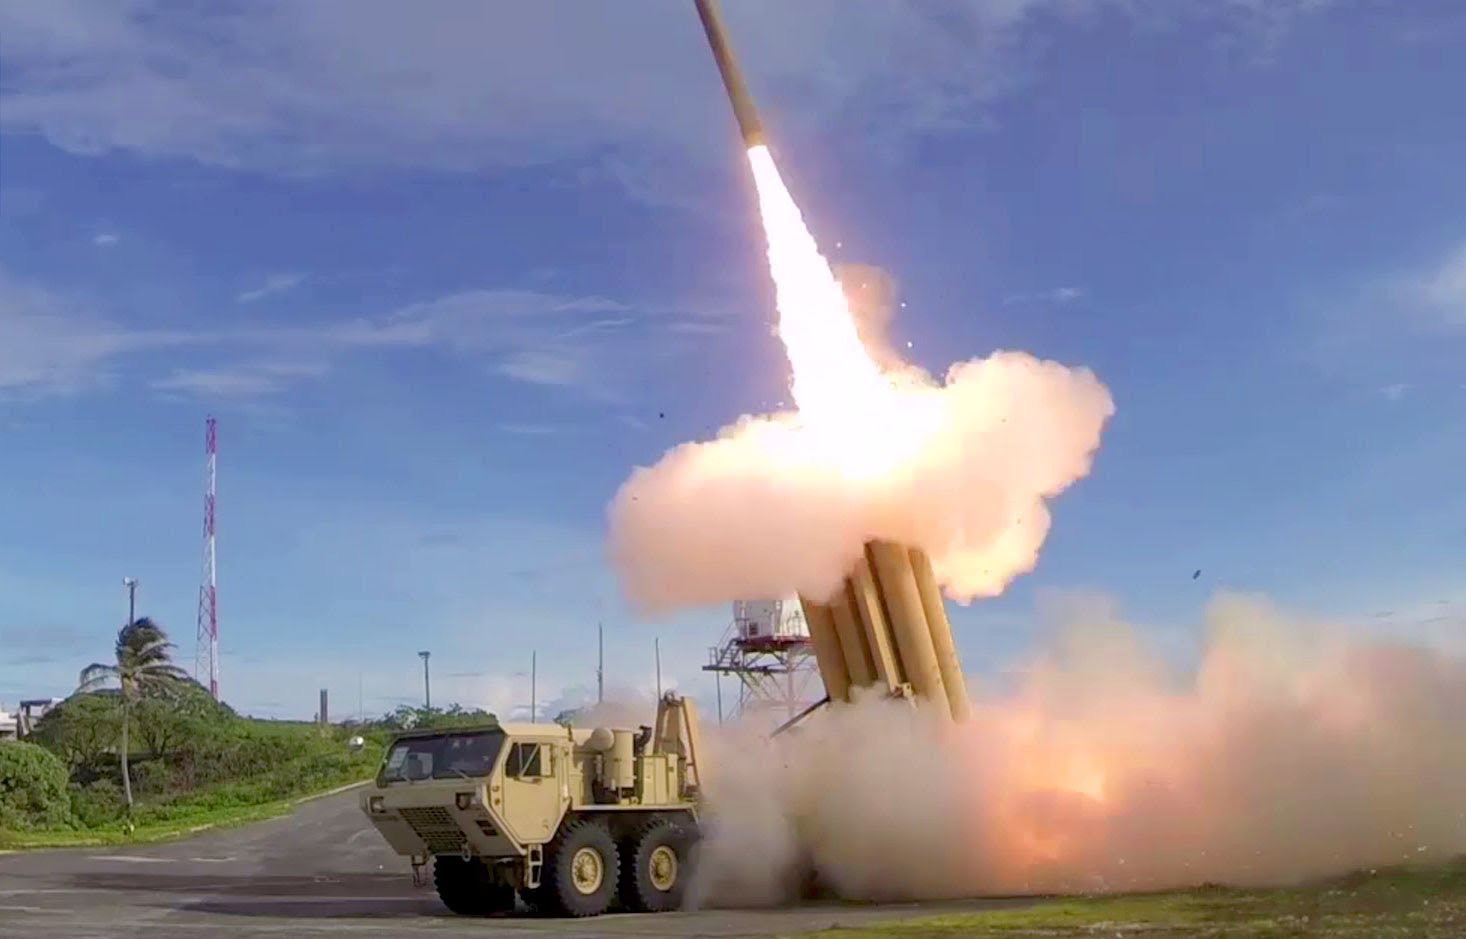 A New Approach for U.S. Missile Defense?